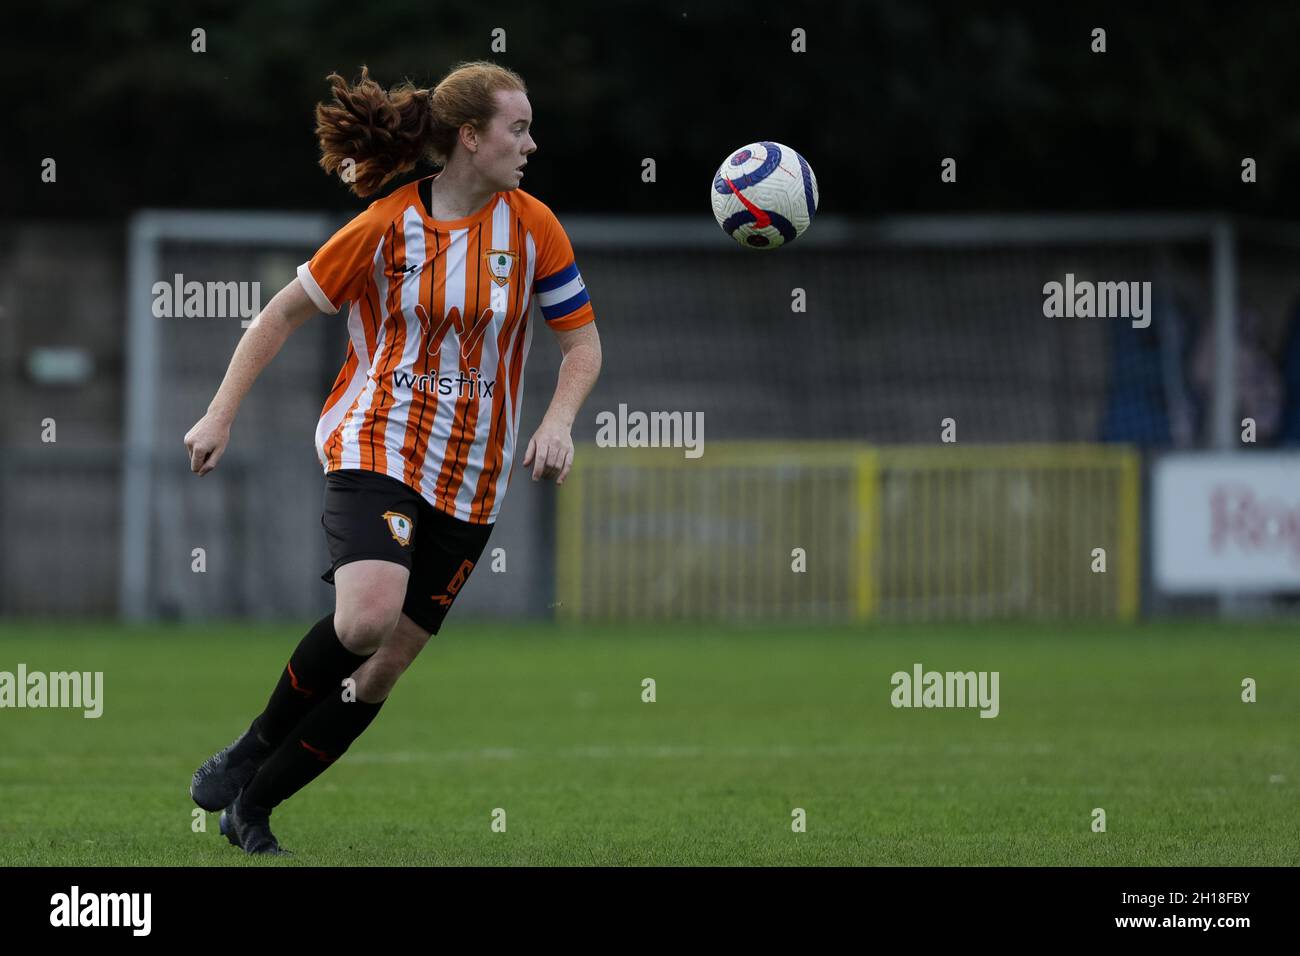 London, UK. 17th Oct, 2021. London, England, October 17th 20 Anya Kinnane (6 Ashford) in action at the London and South East Regional Womens Premier game between Dulwich Hamlet and Ashford at Champion Hill in London, England. Liam Asman/SPP Credit: SPP Sport Press Photo. /Alamy Live News Stock Photo